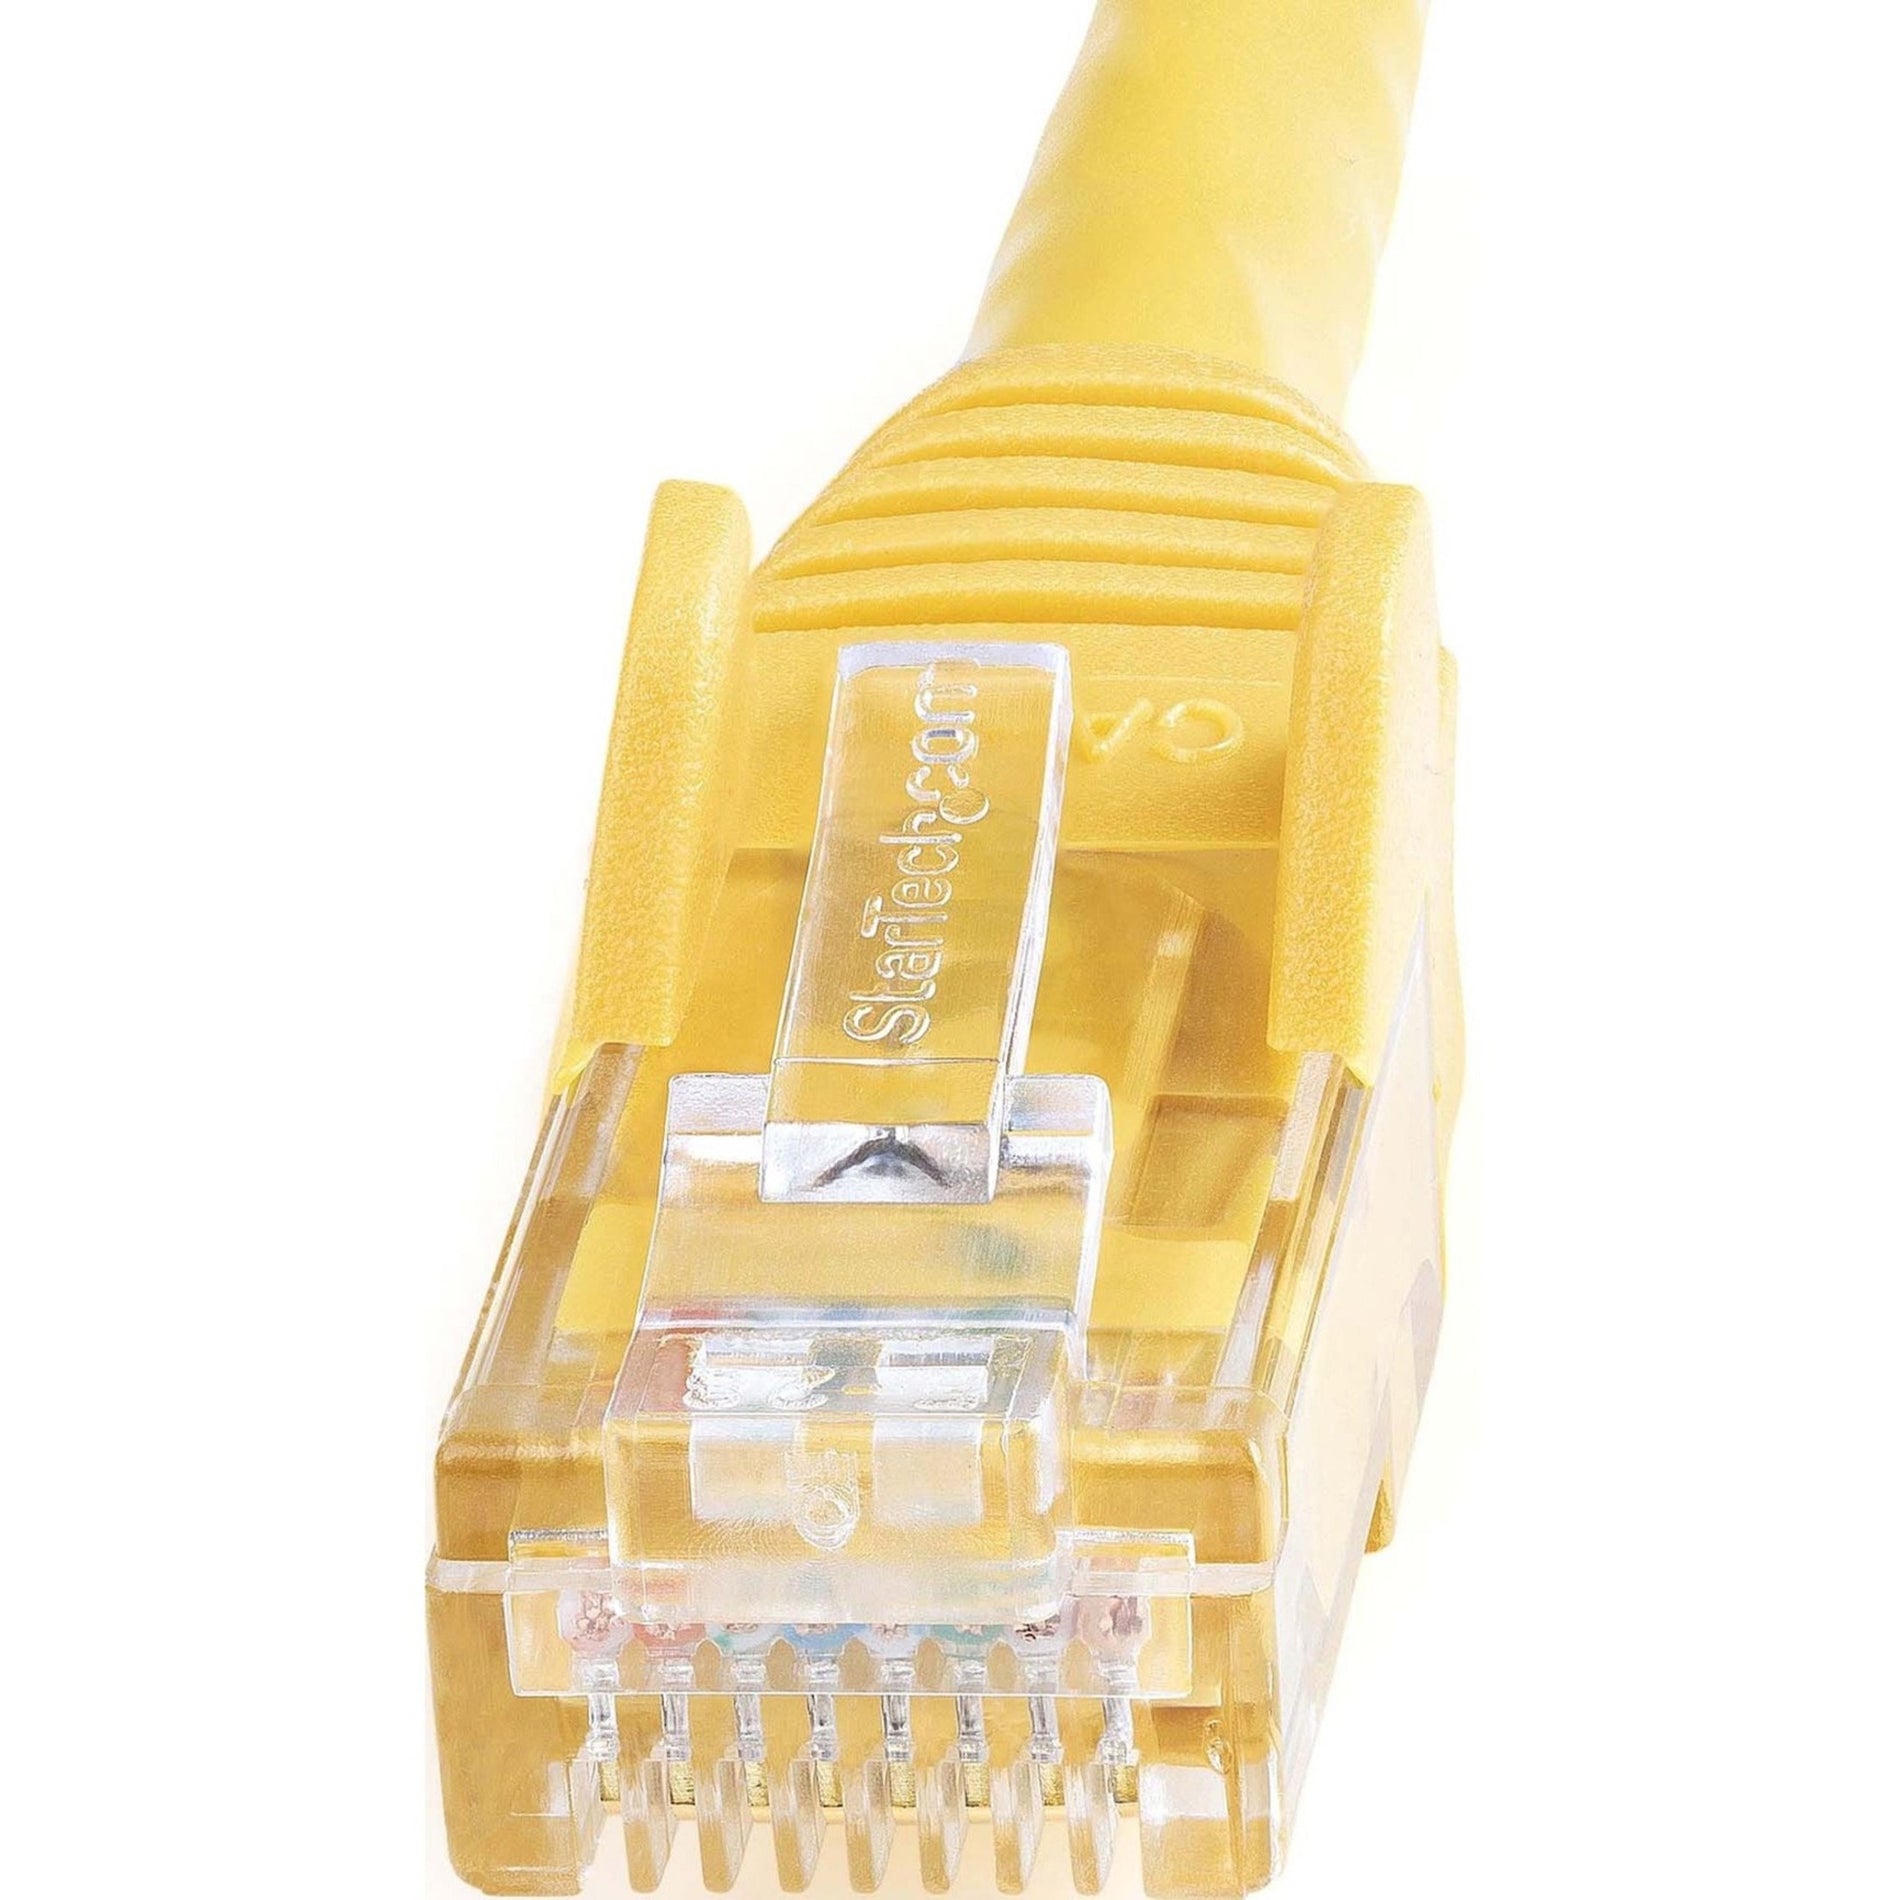 StarTech.com N6PATCH35YL 35 ft Yellow Snagless Cat6 UTP Patch Cable, Lifetime Warranty, 10 Gbit/s Data Transfer Rate, Gold Connectors